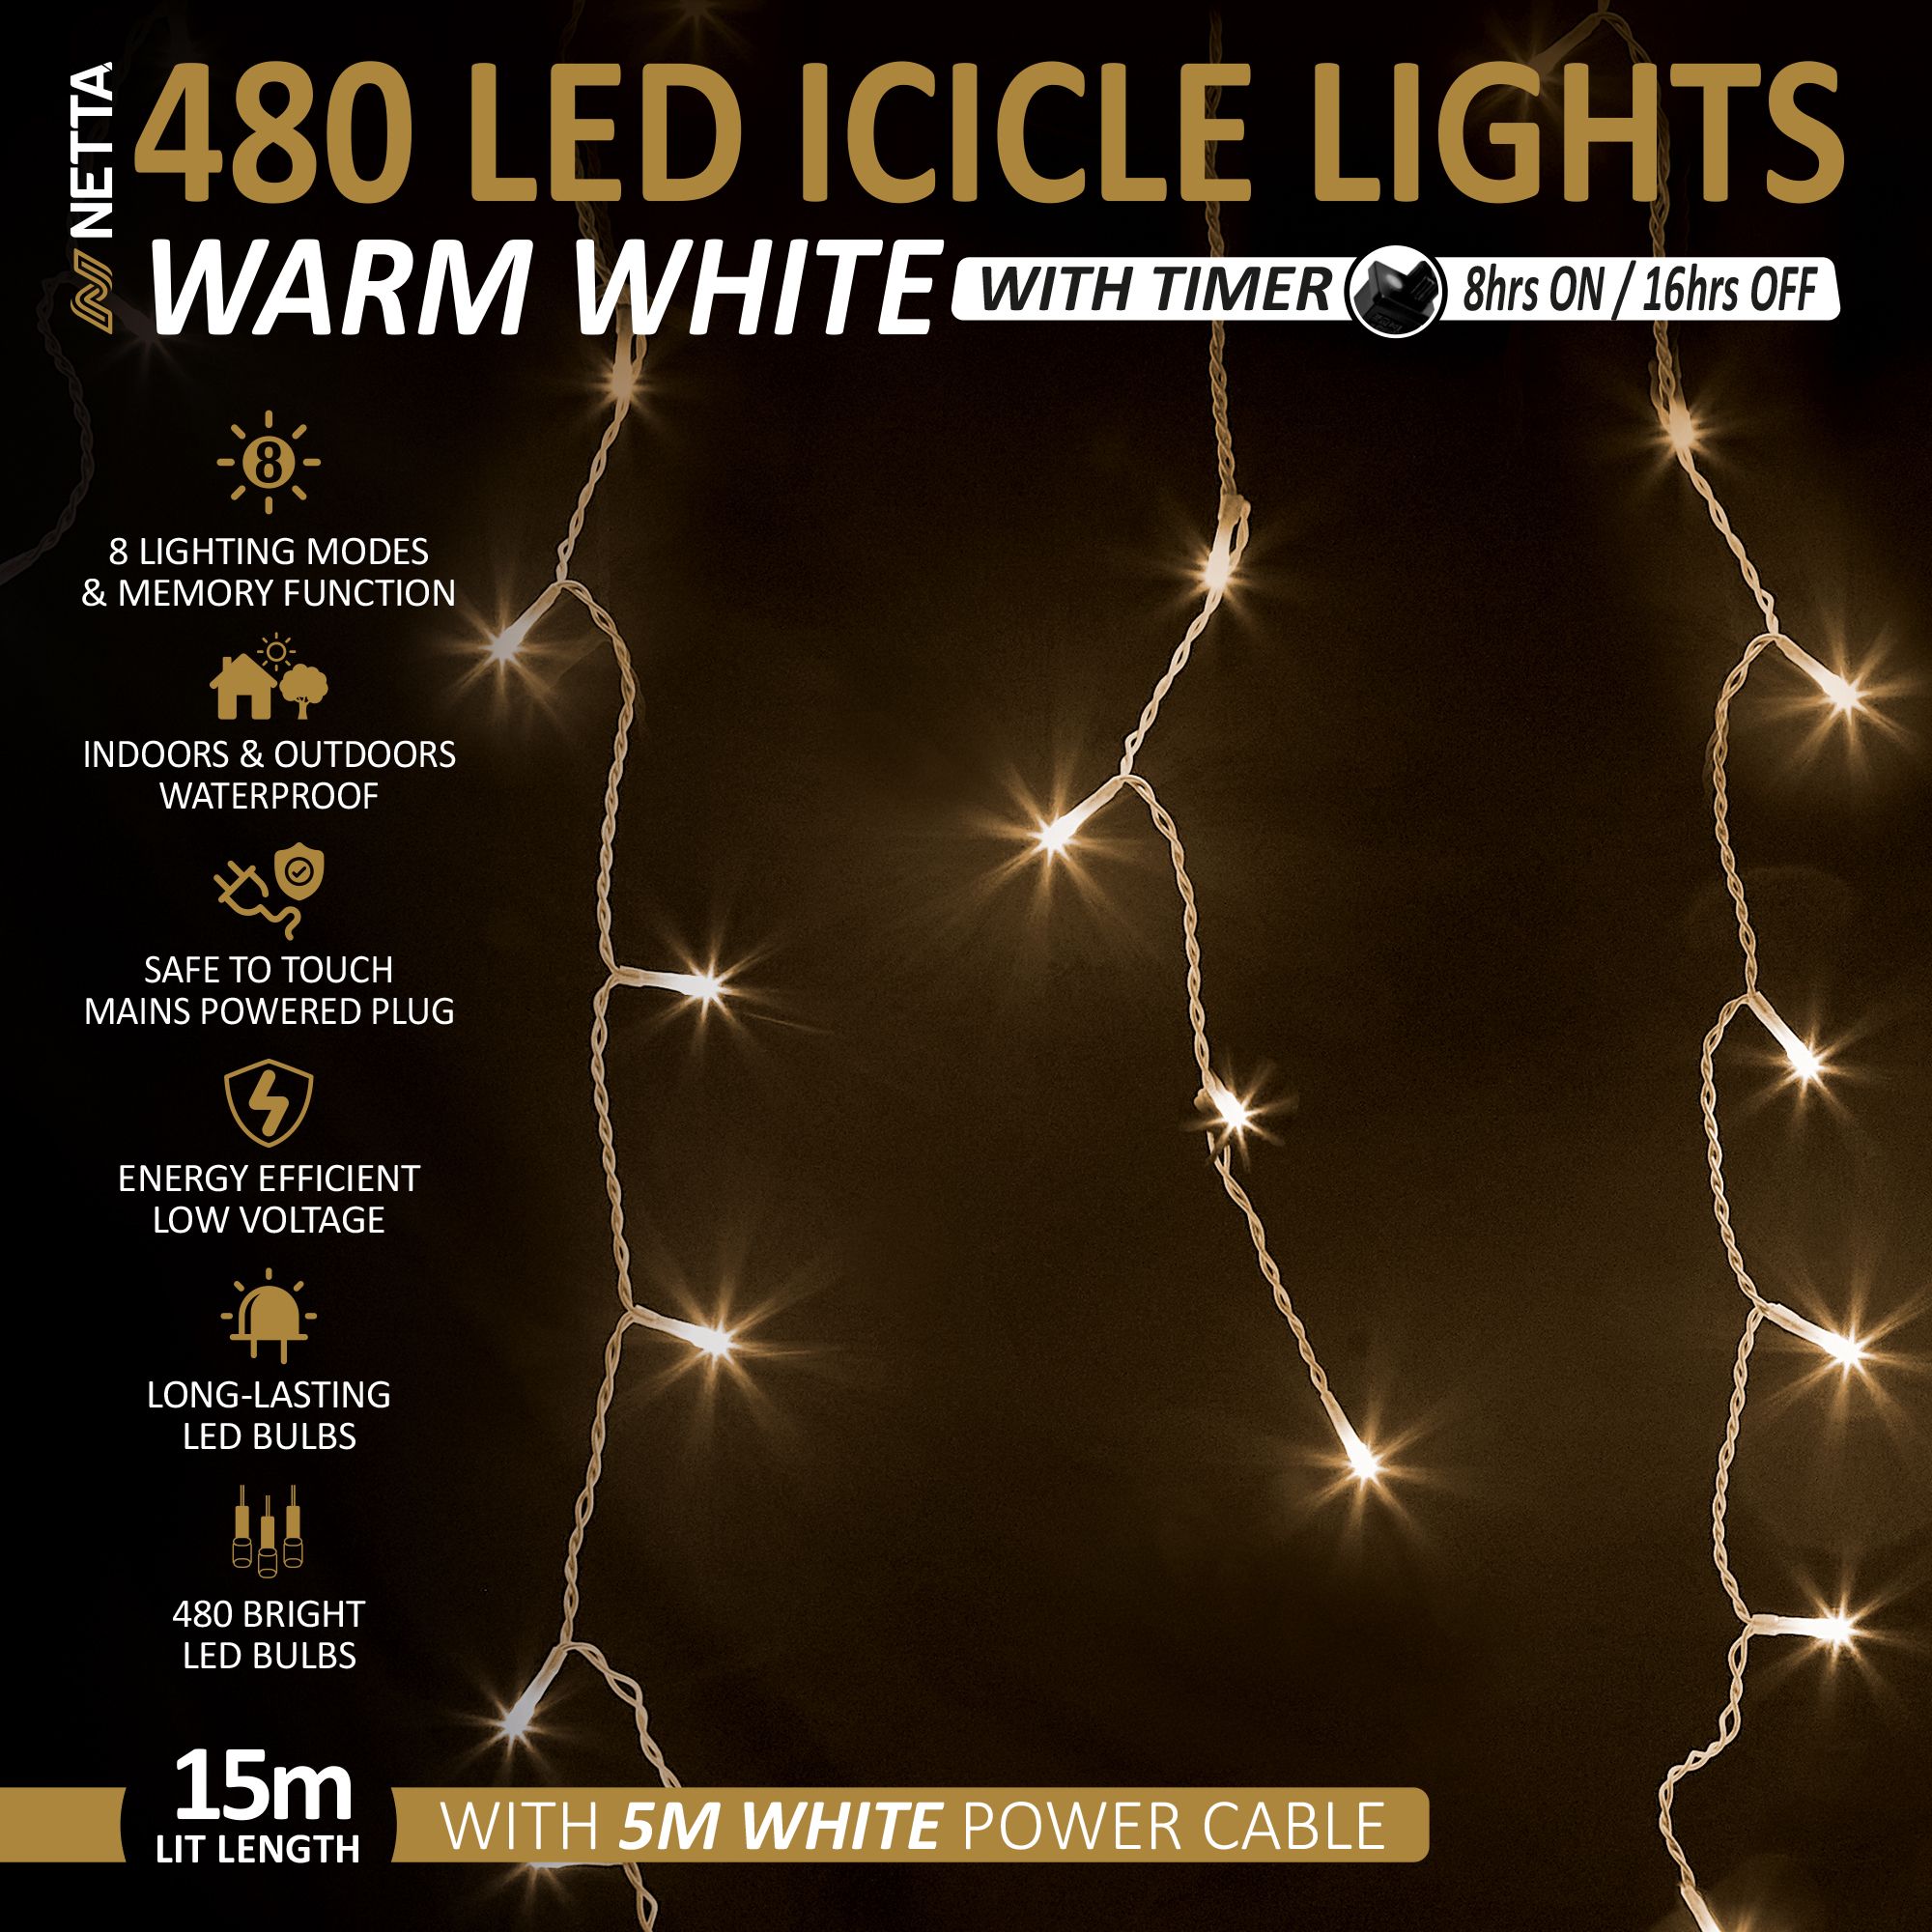 NETTA 480 LED Icicle Lights Outdoor Christmas Lights 15M Lit Length, Timer - Warm White, with White Cable